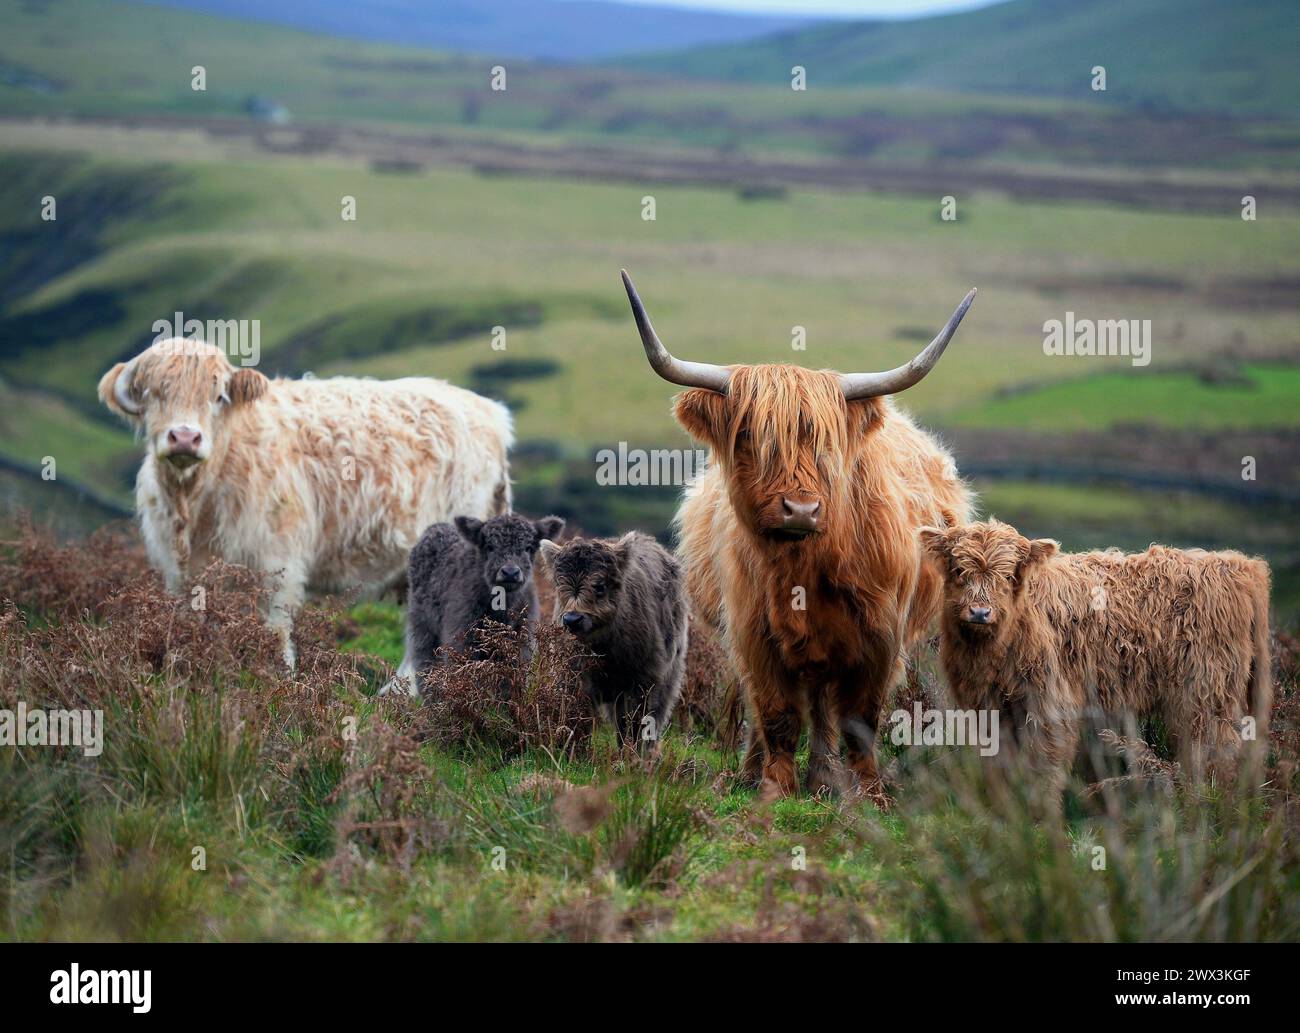 Highland Cows and their young photographed near Kirkland in the Northern Pennines, Cumbria.The Highland is a traditional breed of Western Scotland. Stock Photo